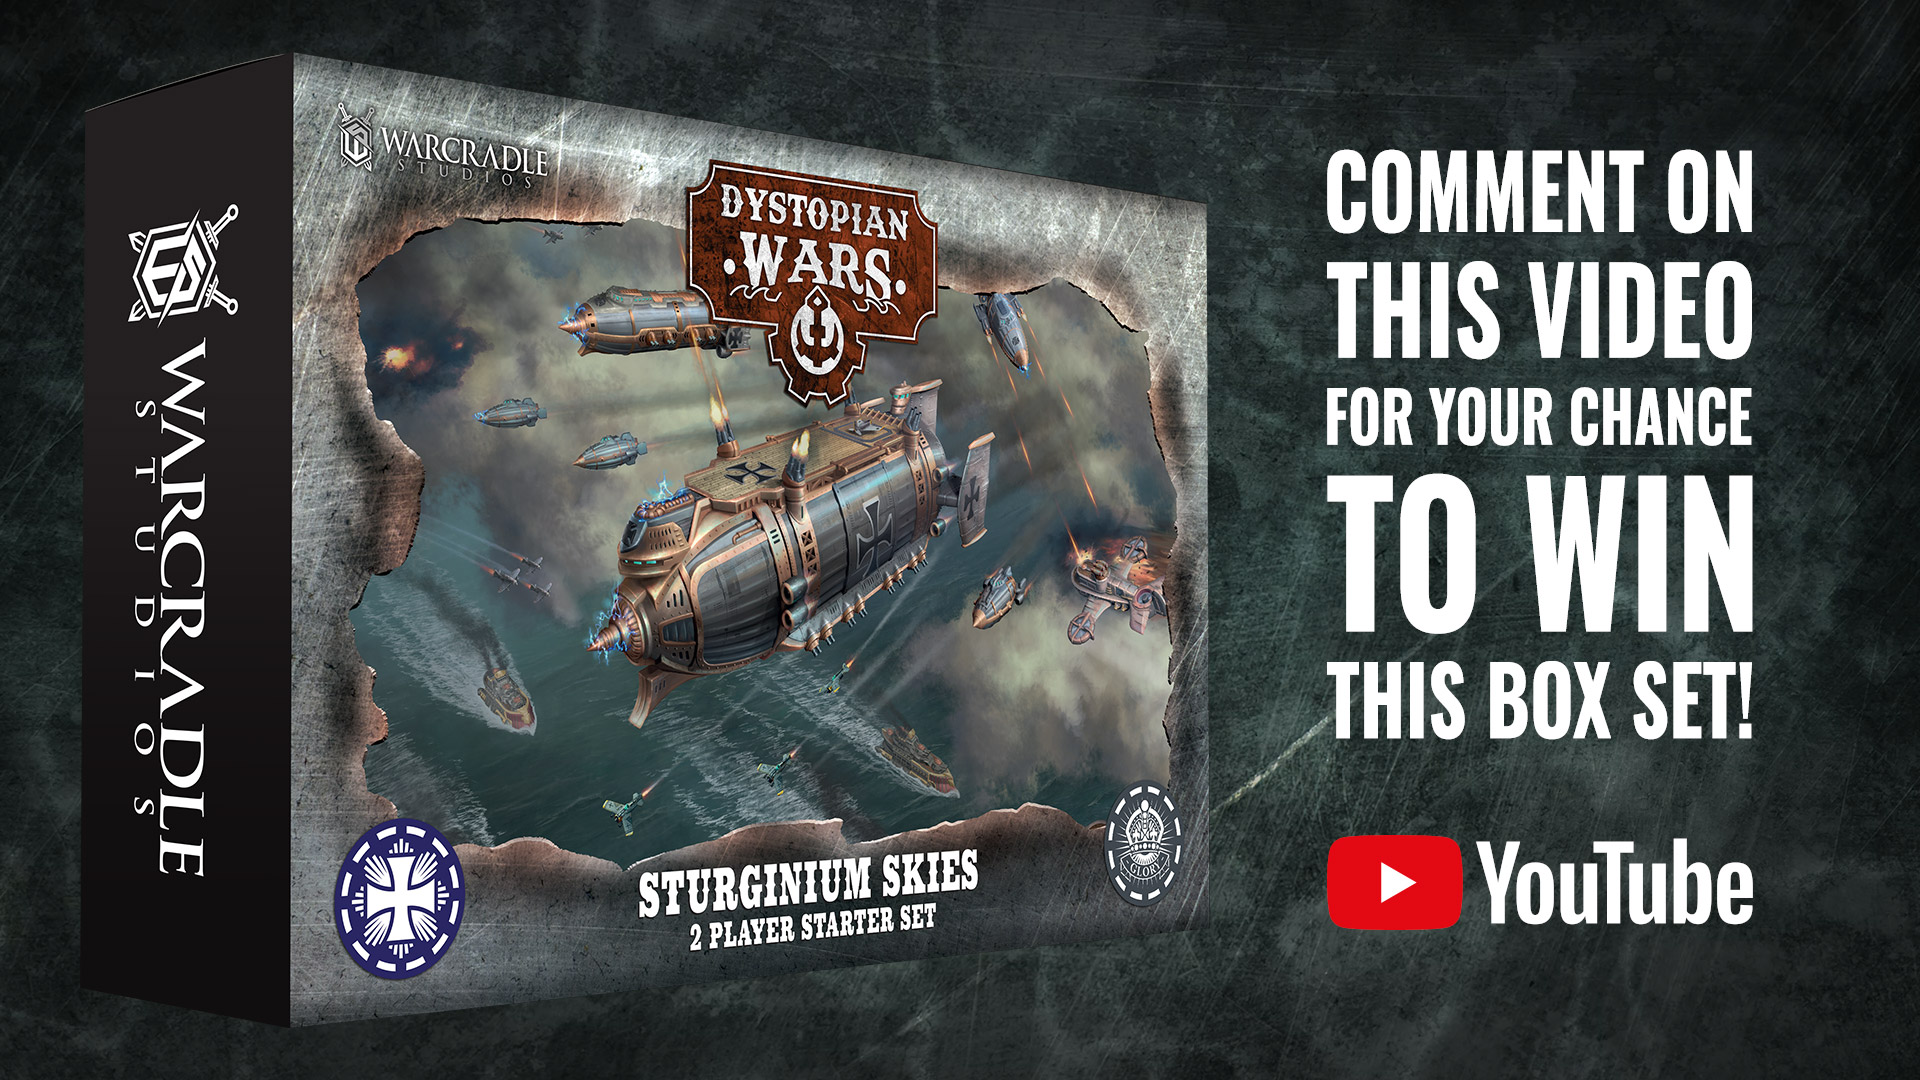 Comment-To-Win-Dystopian-Wars-Sturginium-Skies-2-Player-Box-Set